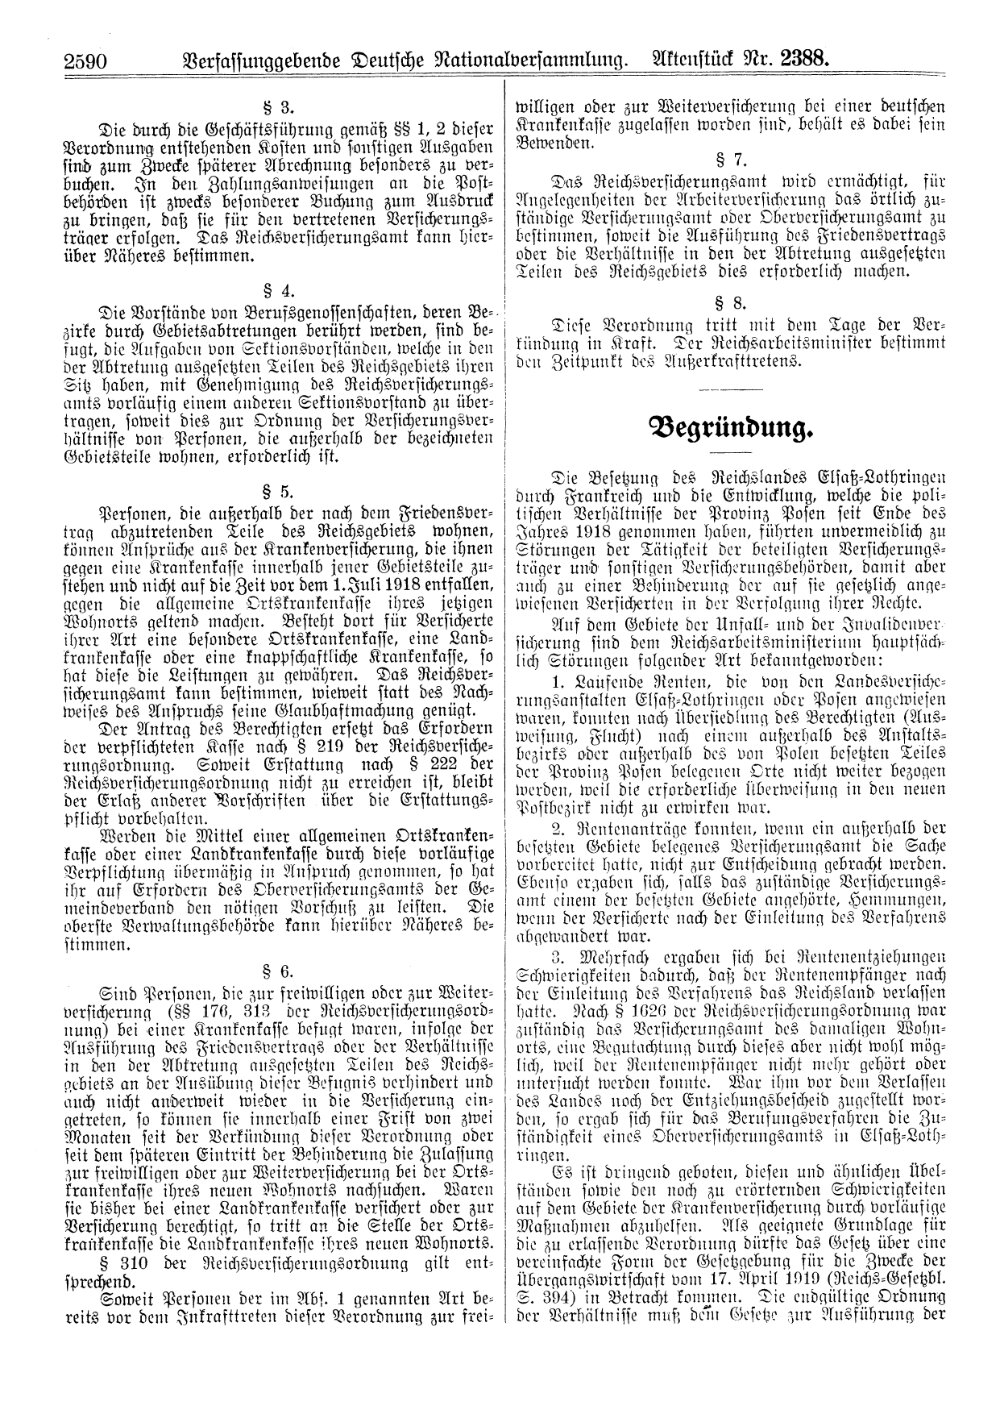 Scan of page 2590